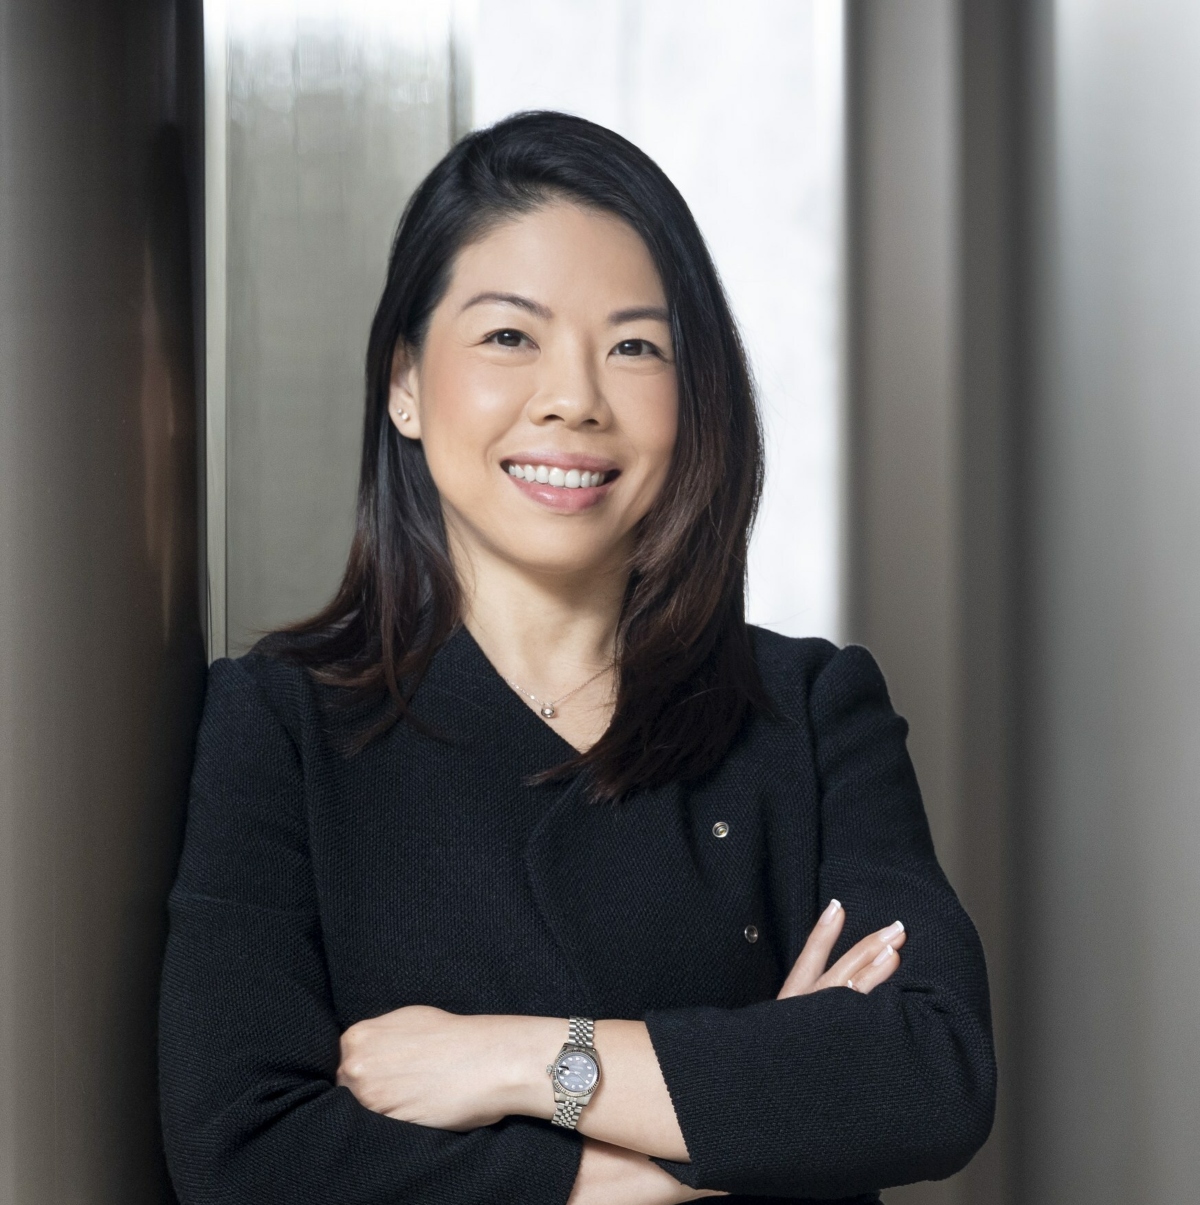 Digital Realty appoints Serene Nah as managing director, Head of Asia Pacific